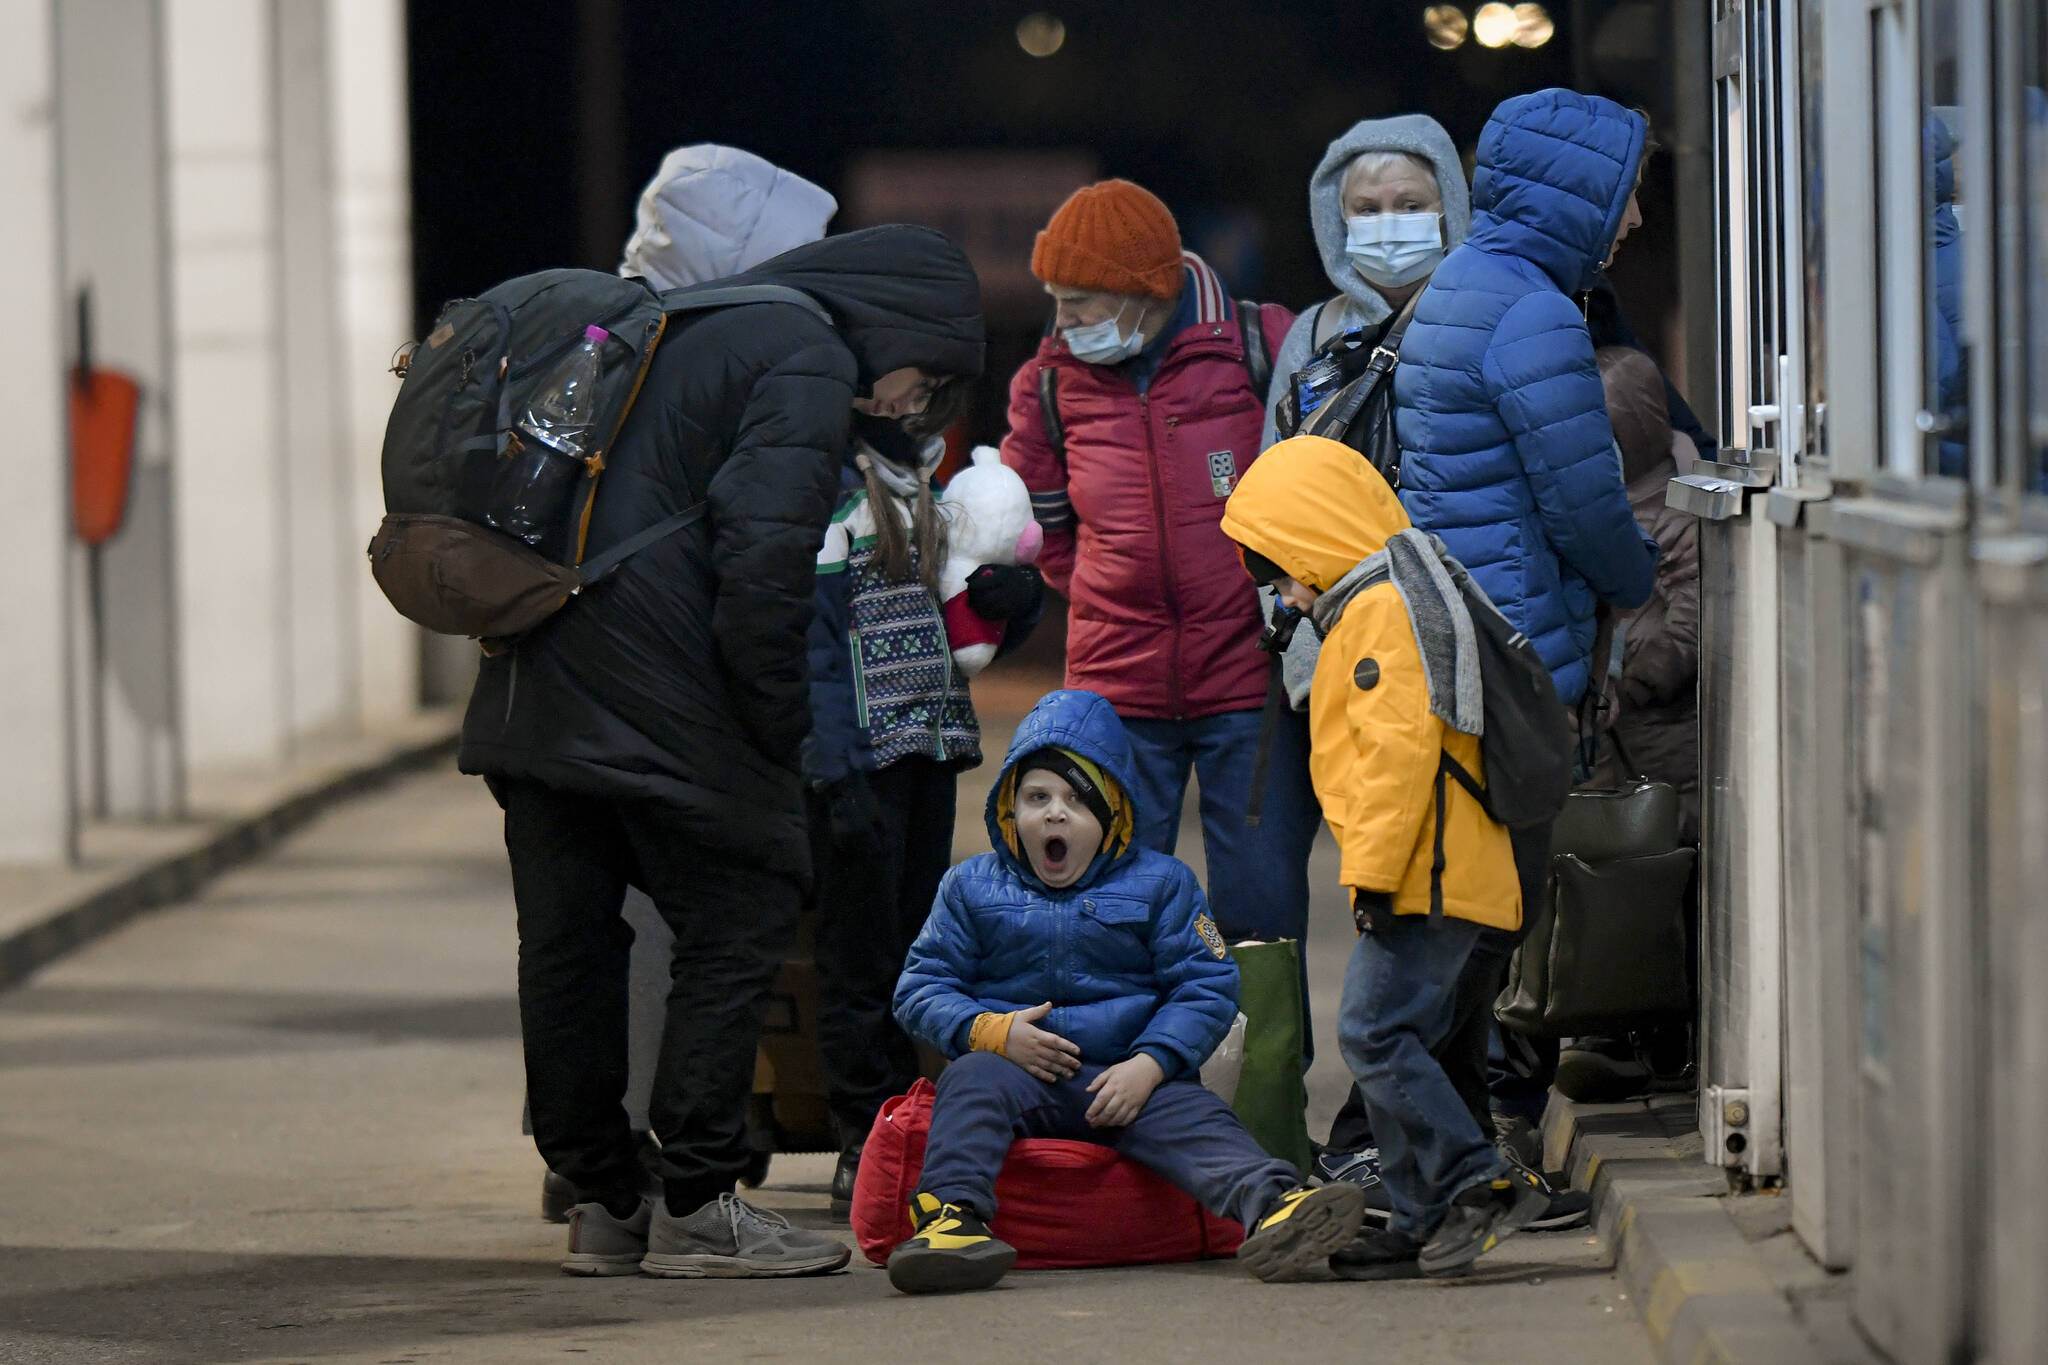 A child from Ukraine yawns as he waits to gain entry into Romania at the Romanian-Ukrainian border, in Siret, Romania, Friday, Feb. 25, 2022. Romania, which shares around 600 kilometres (372 miles) of borders with Ukraine to the north, is seeing an influx of refugees from the country as many flee Russia’s attacks. (AP Photo/Andreea Alexandru)